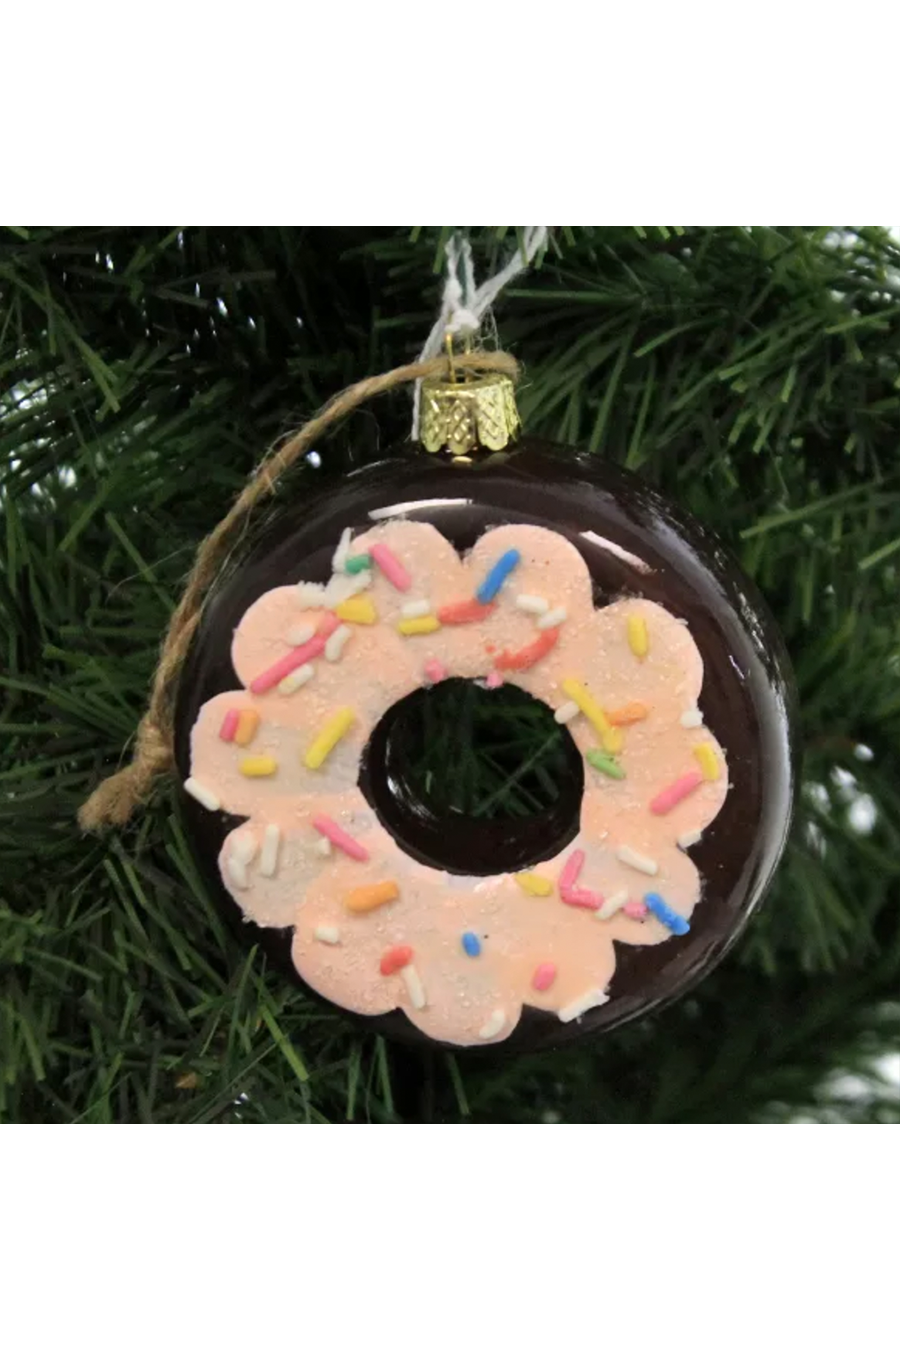 Assorted Donuts Ornament - Main Image Number 2 of 3